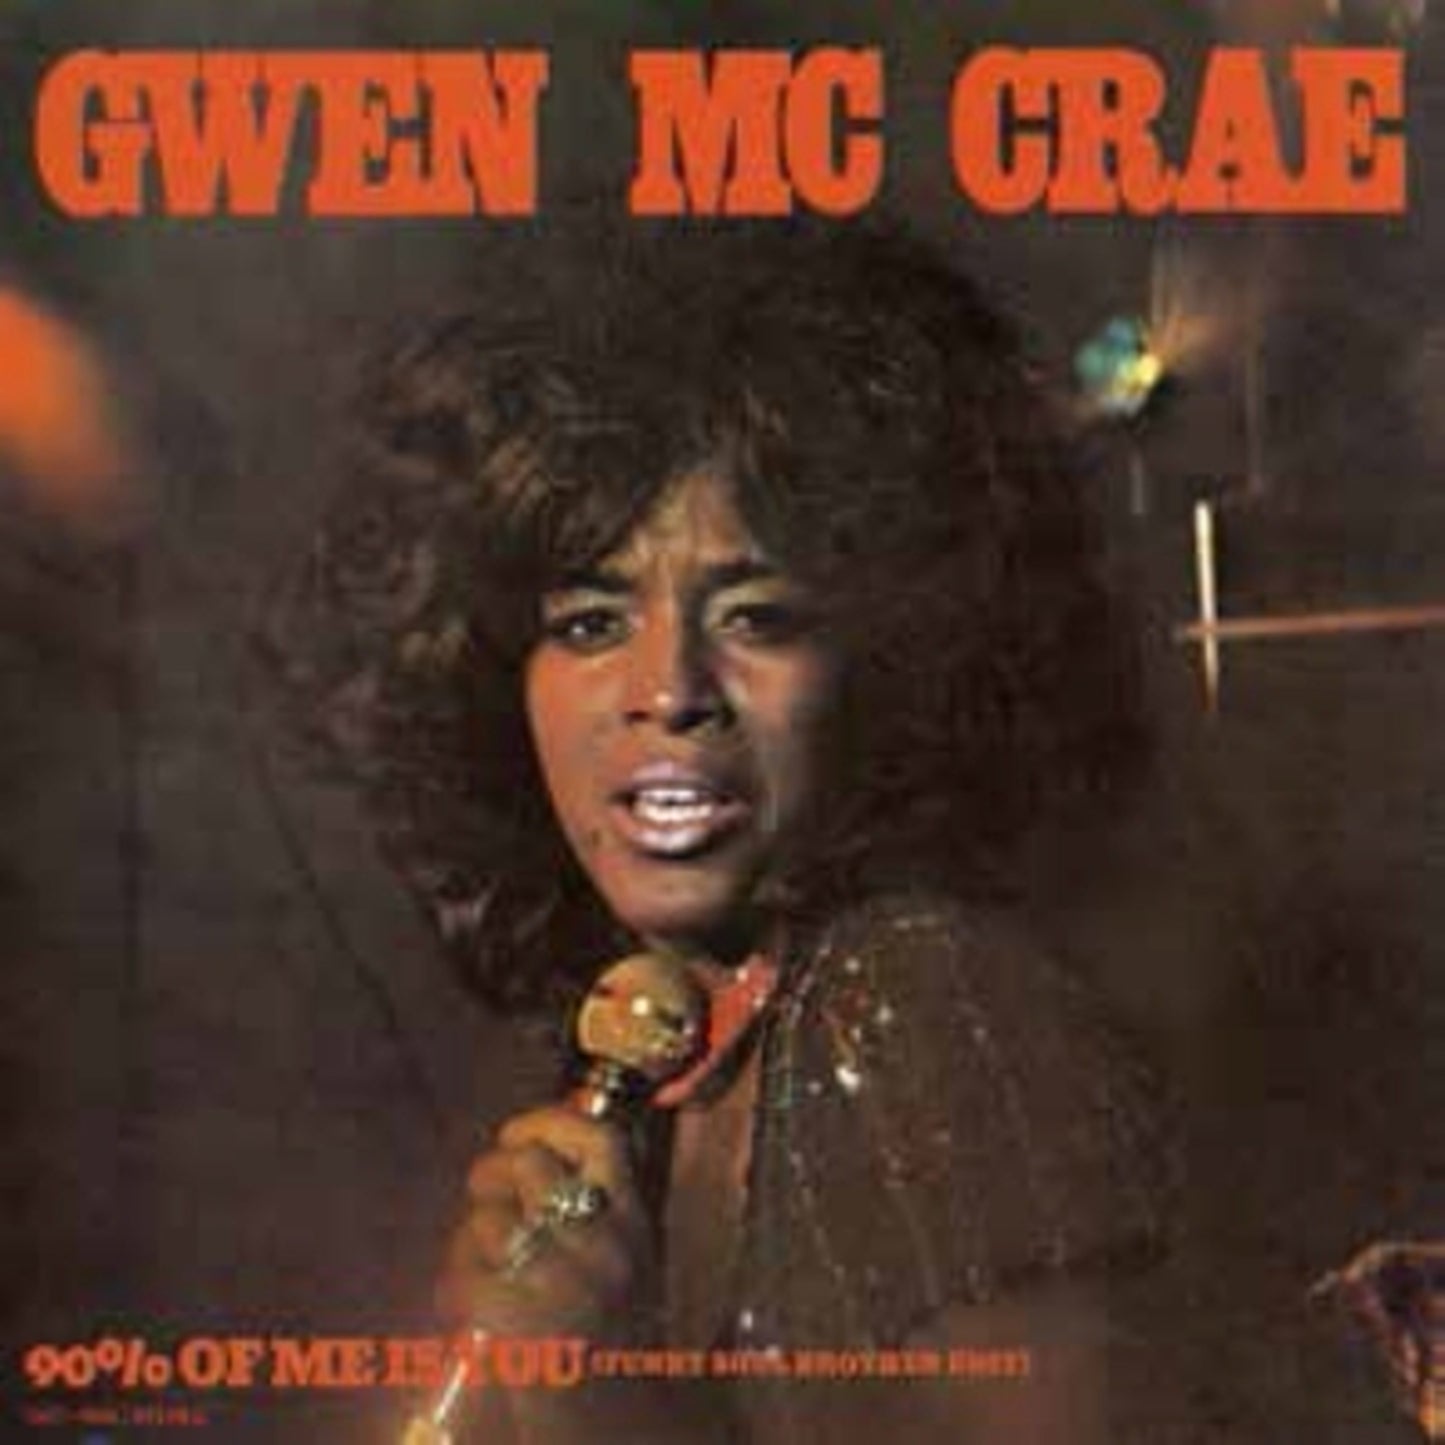 【7"】Gwen McCrae - 90% Of Me Is You (Funky Soul Brother Edit) / 90% Of Me Is You (Original)